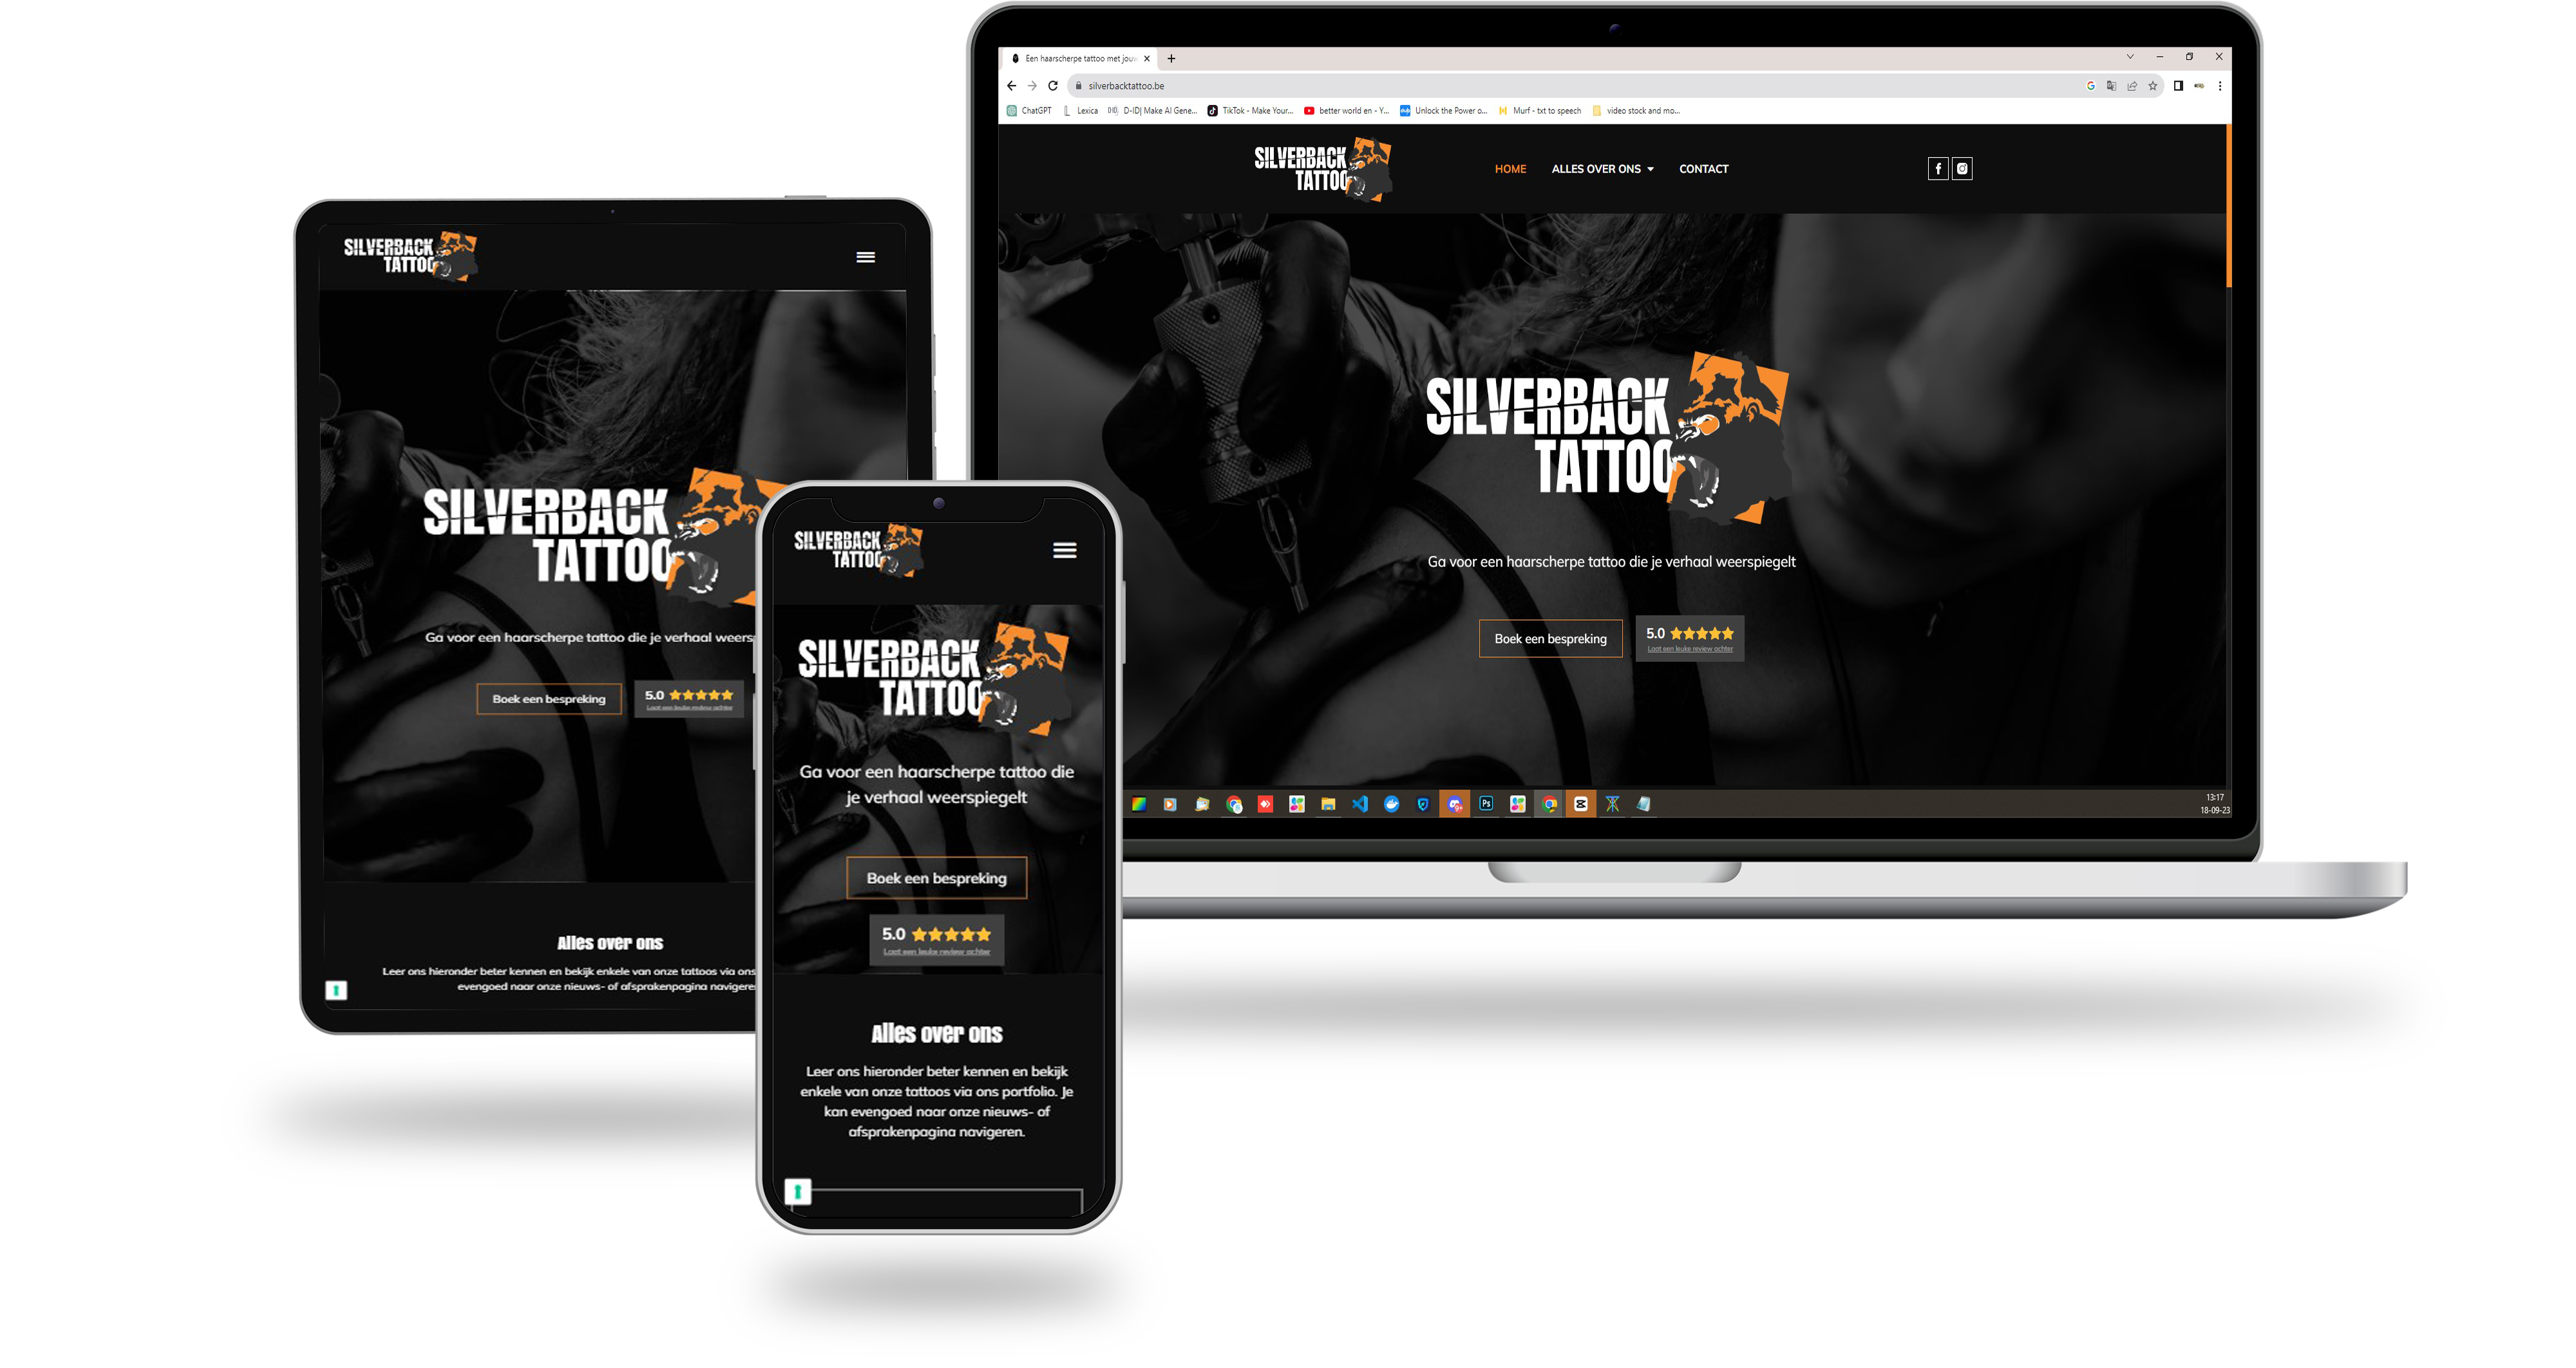 Chockies Web Agency: Responsive Web Design Experts. Optimize your online presence across all devices